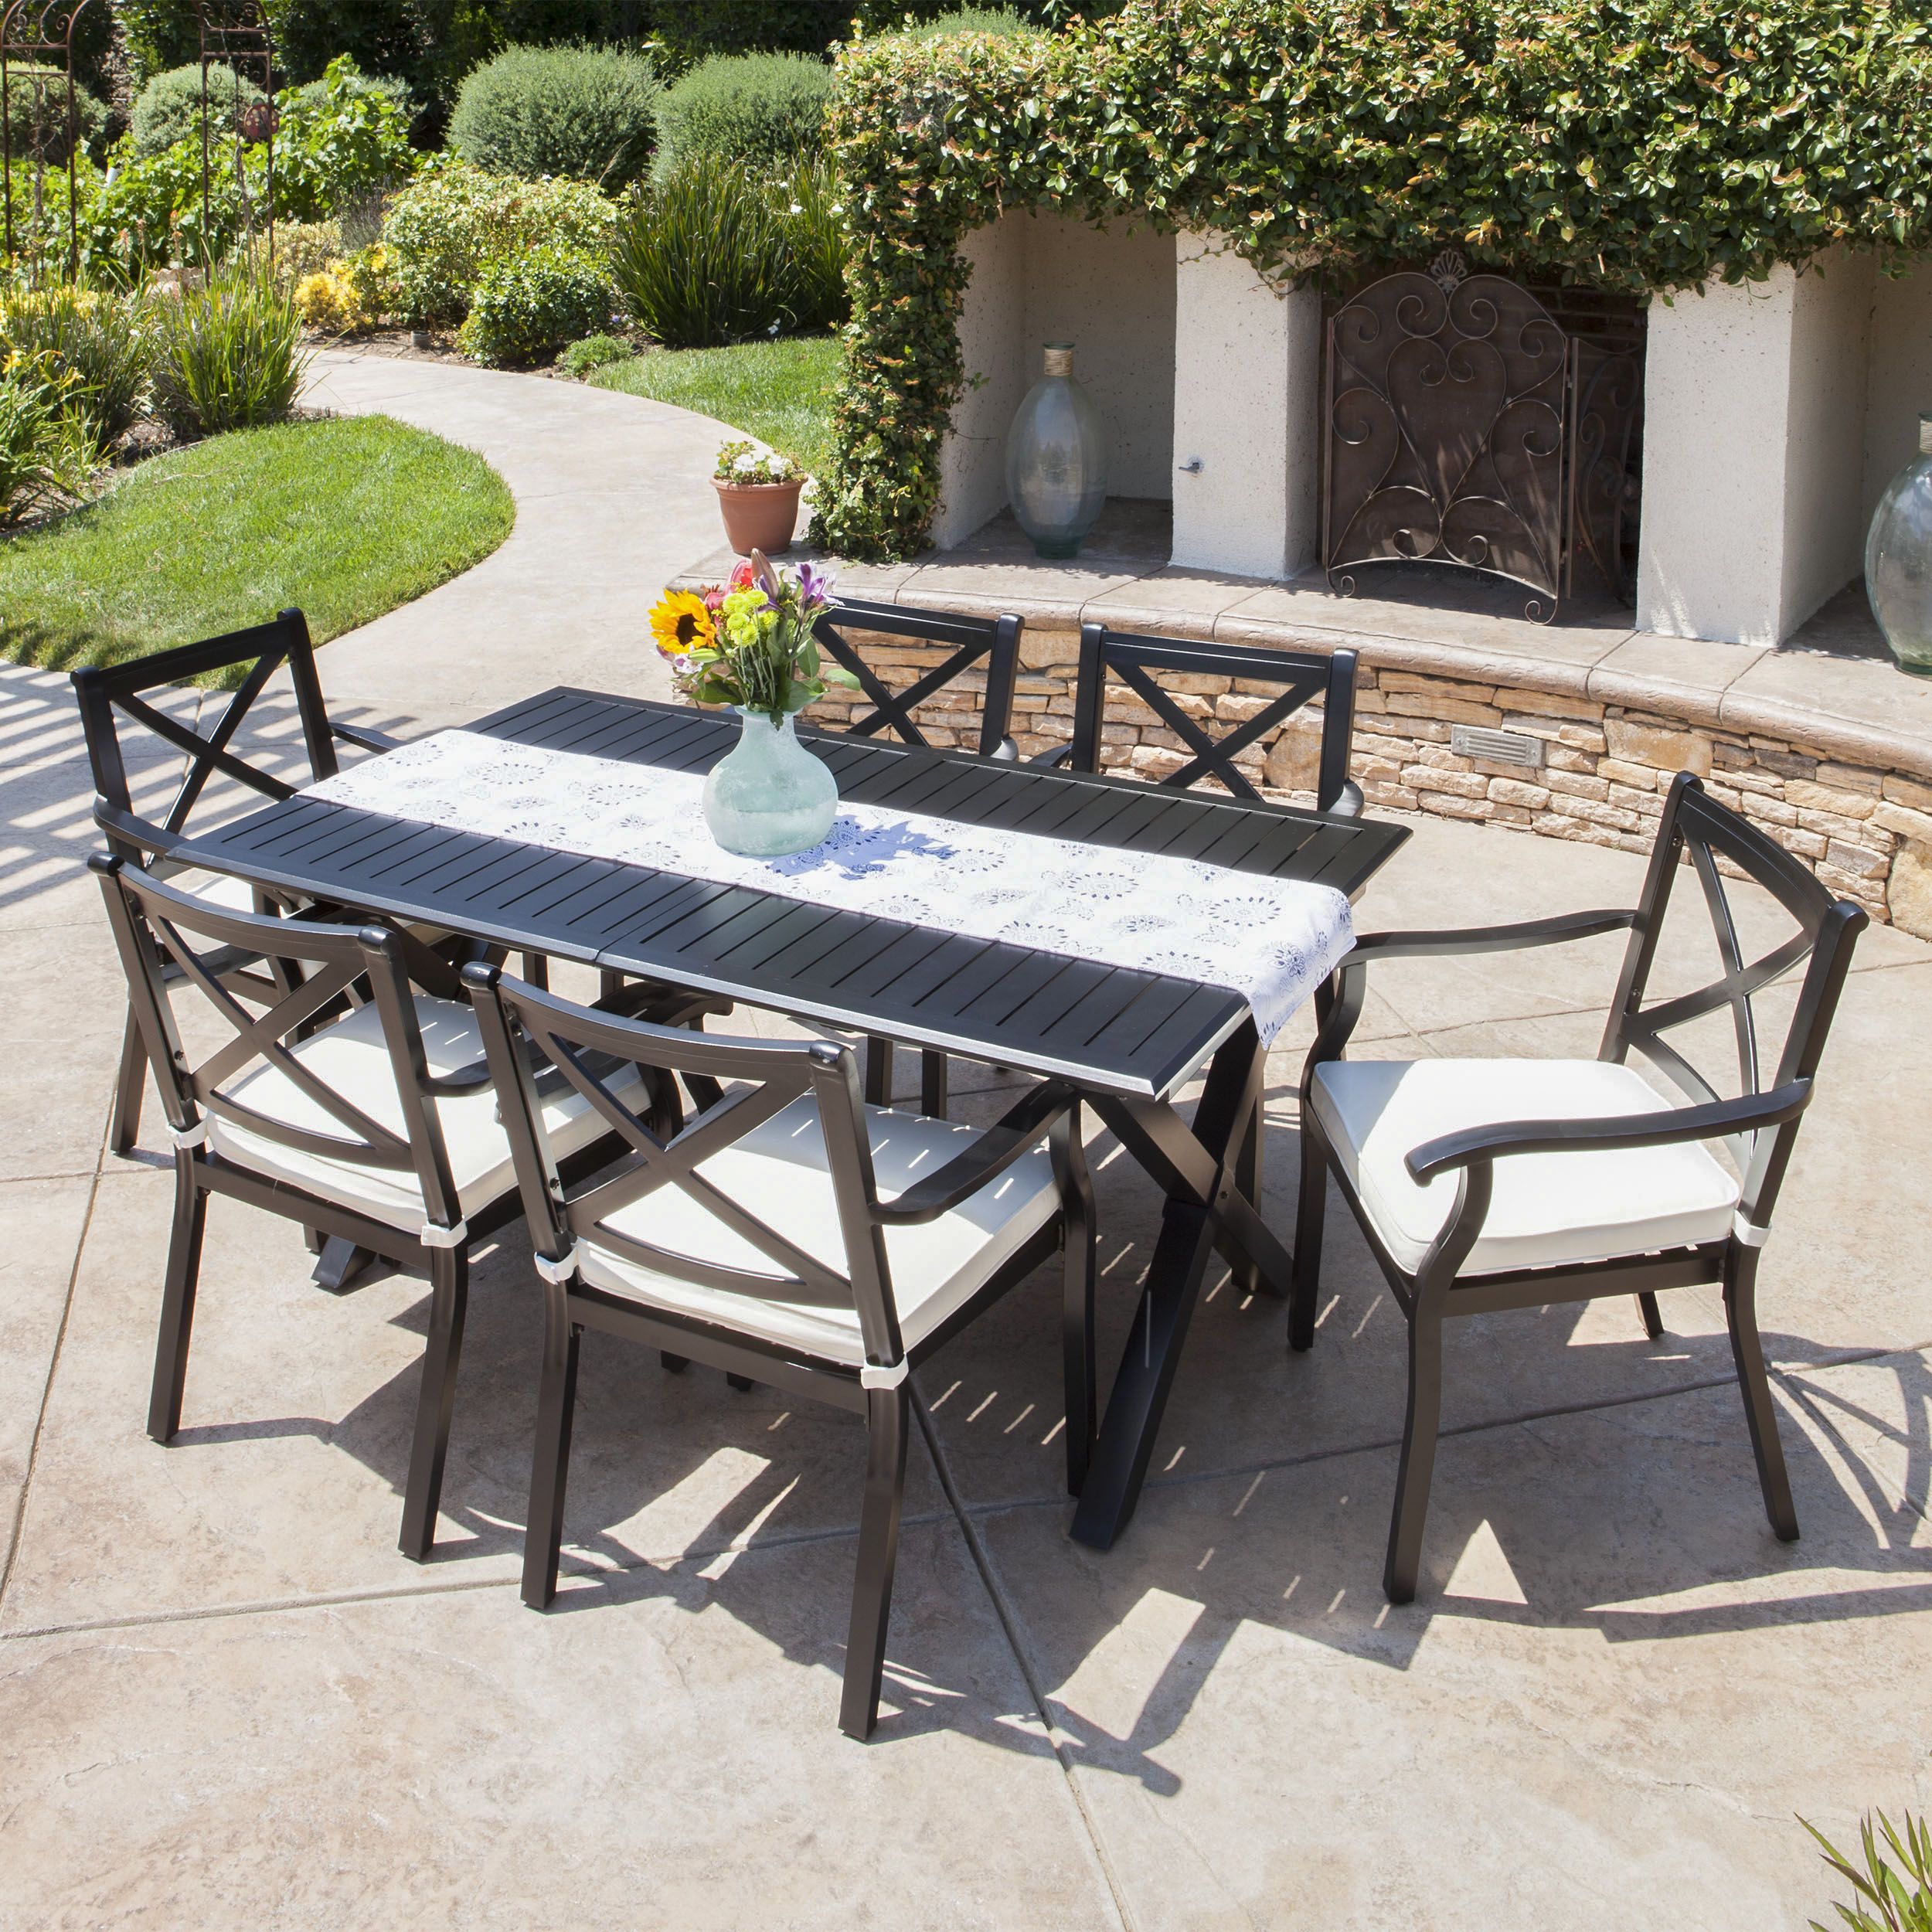 Outdoor Expandable 7 Piece Cast Aluminum Dining Set With Cushions,Ivory For 7 Piece Patio Dining Sets With Cushions (View 7 of 15)